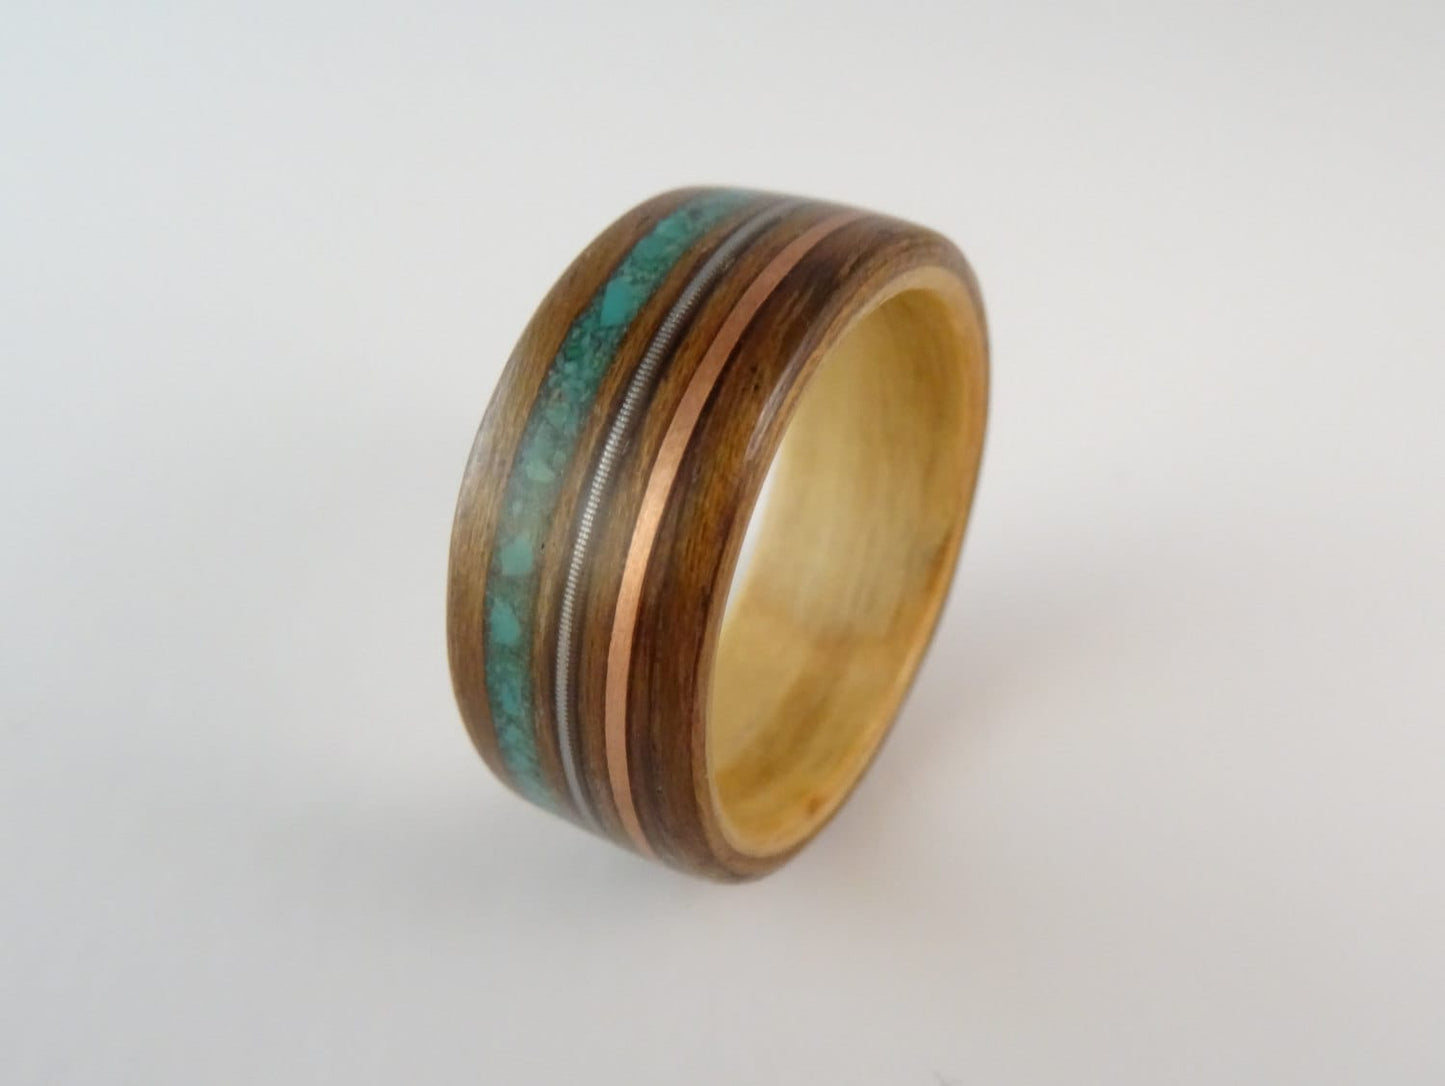 Maple & Tropical Olive Wood with Turquoise, Copper and a Guitar String Bent Wood Ring